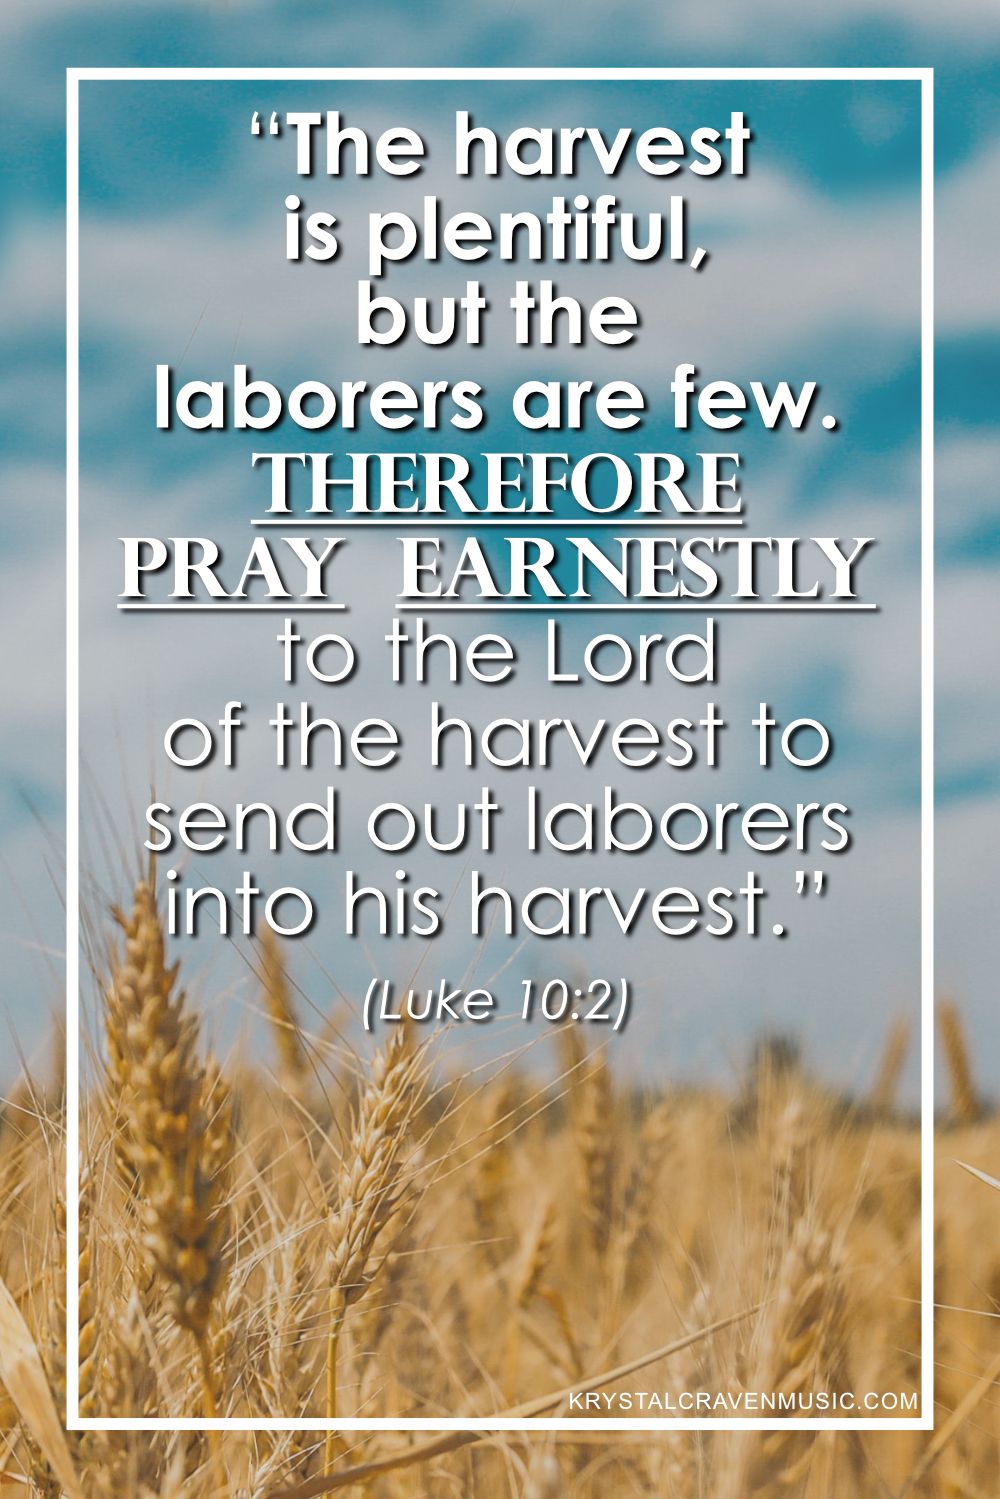 The Bible verse text from Luke 10:2: "The harvest is plentiful, but the laborers are few. Therefore pray earnestly to the Lord of the harvest to send out laborers into his harvest." This is overlaid on a photo of a wheat field with a blue sky and clouds in the background.